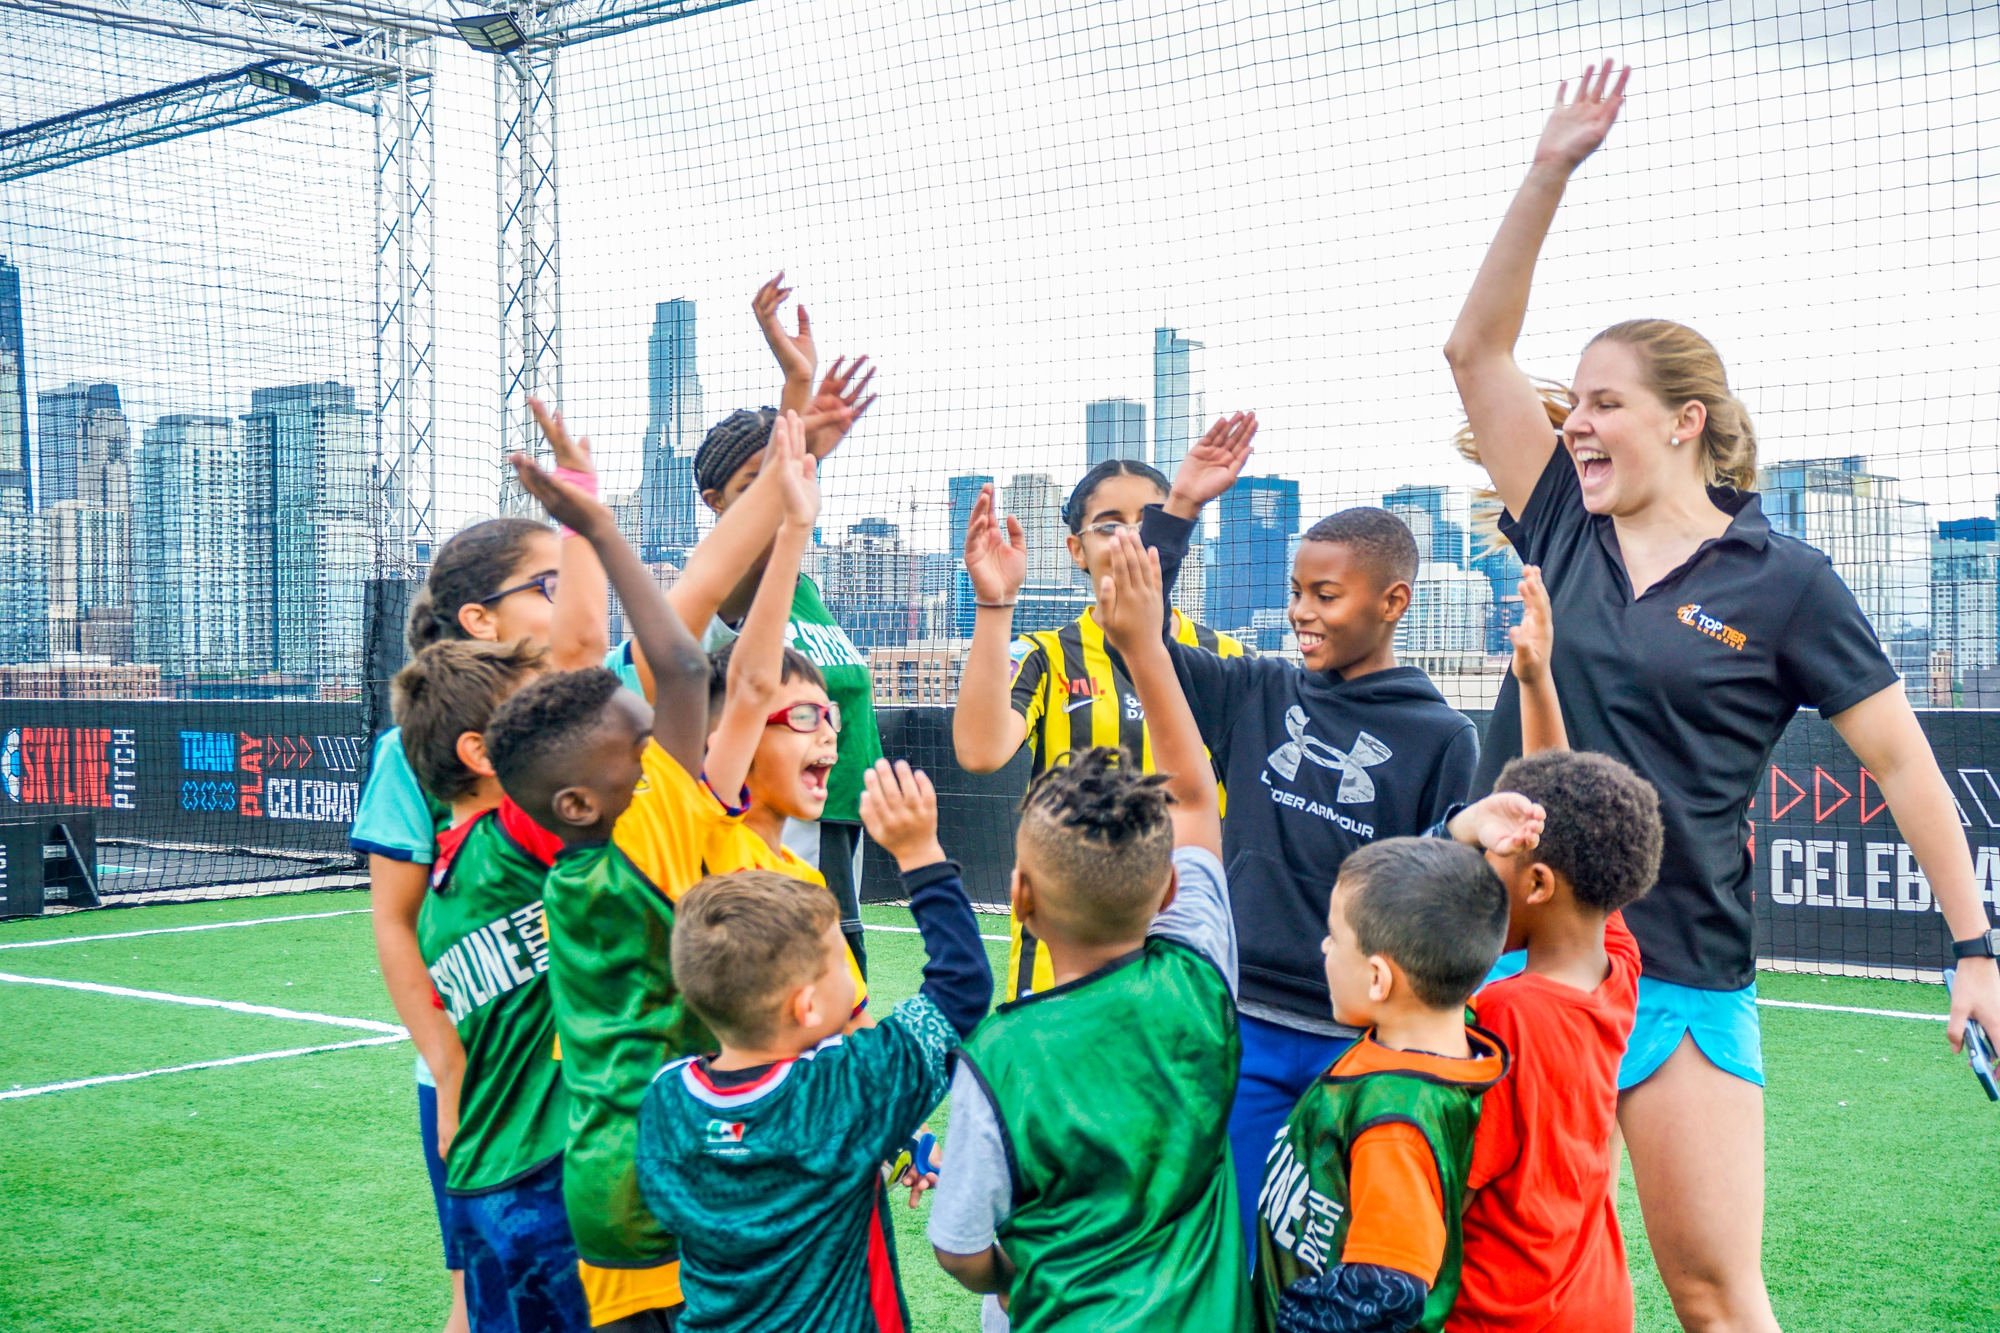 Cara and all the young athletes at our Skyline Pitch Soccer clinic in Chicago!